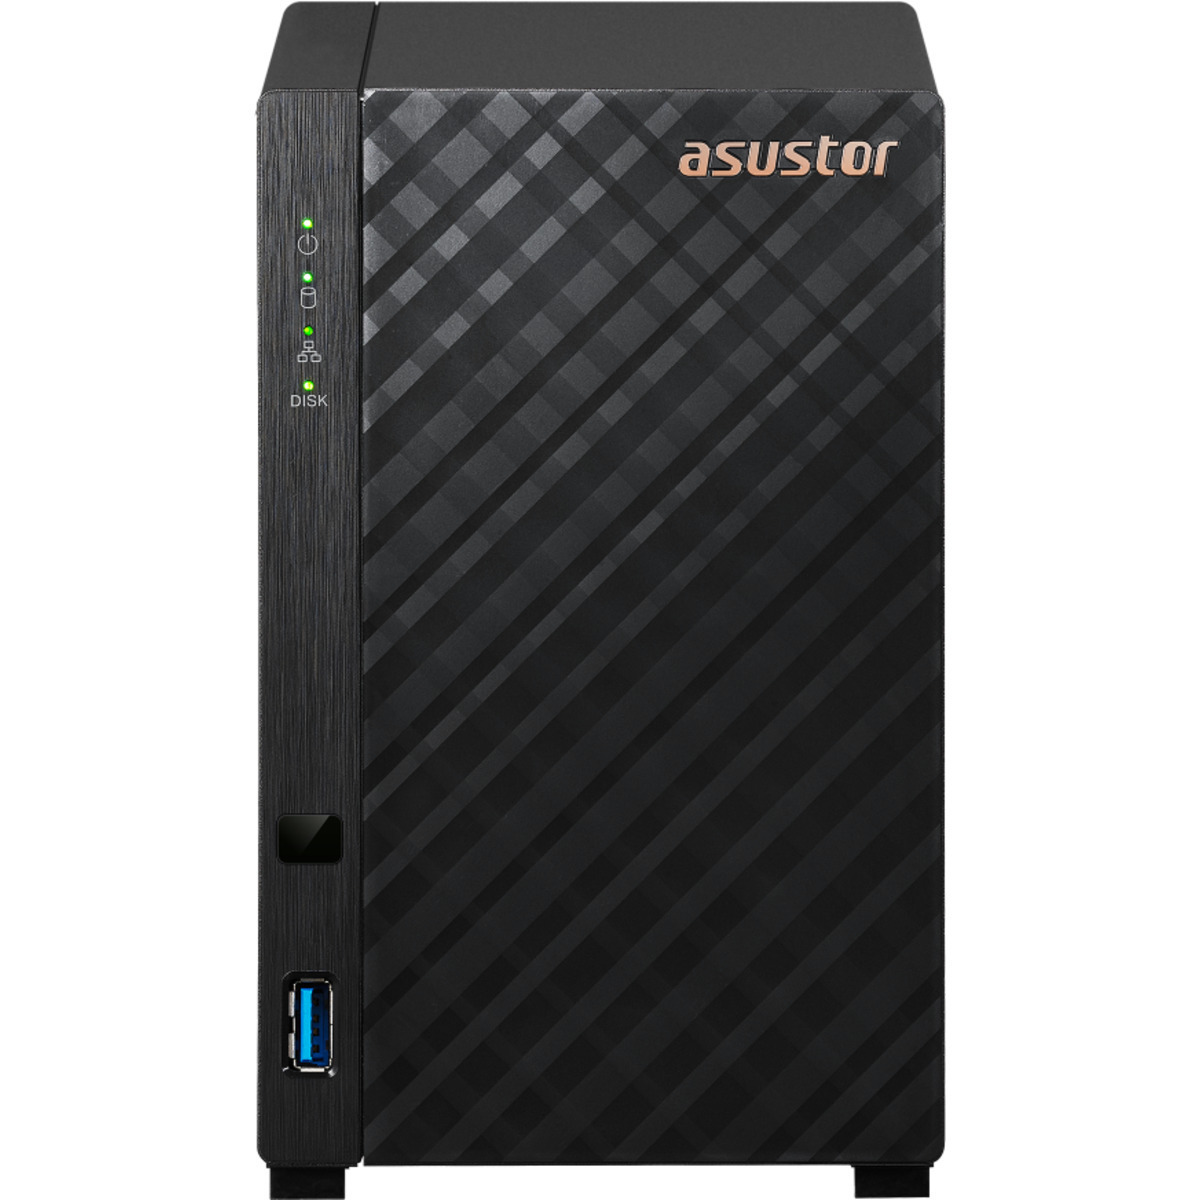 buy $868 ASUSTOR DRIVESTOR 2 AS1102T 32tb Desktop NAS - Network Attached Storage Device 2x16000gb Seagate IronWolf Pro ST16000NT001 3.5 7200rpm SATA 6Gb/s HDD NAS Class Drives Installed - Burn-In Tested - nas headquarters buy network attached storage server device das new raid-5 free shipping usa DRIVESTOR 2 AS1102T